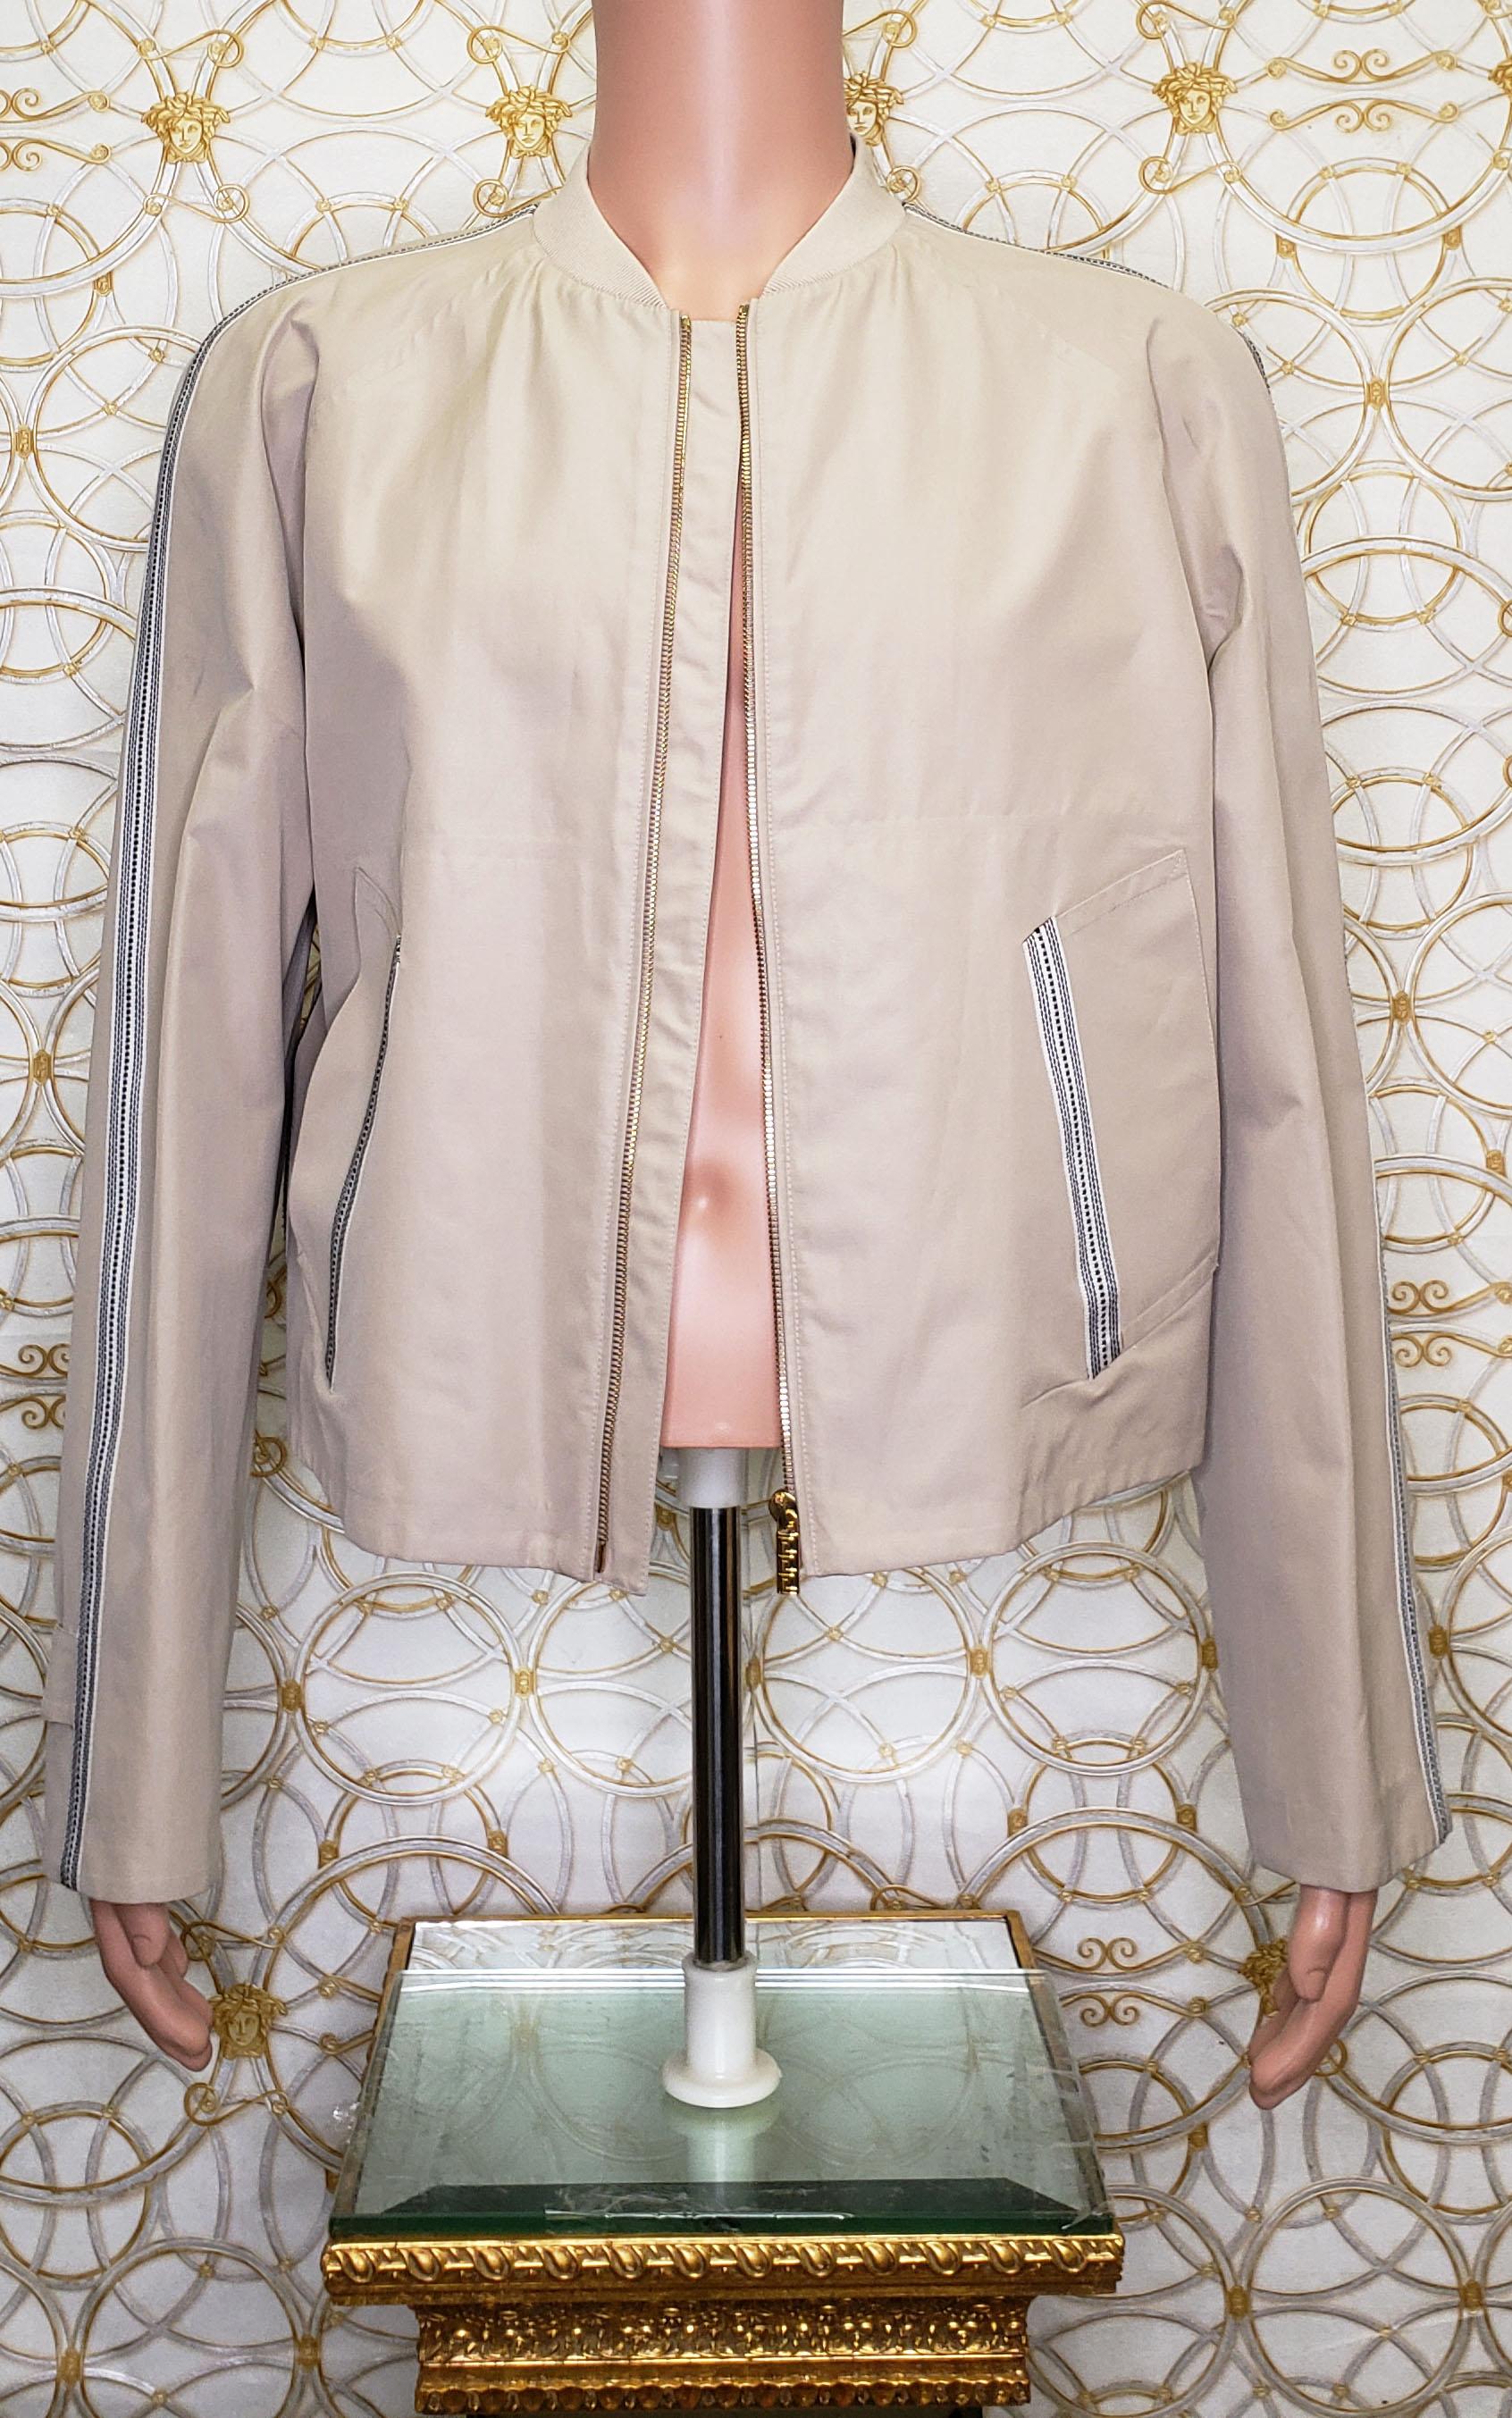 VERSACE COAT

Actual runway sample Spring/Summer  2016 Look #17 

Versace Beige Bomber Jacket
Zipper closure
Content: 47%polyester, 39% cotton, 14% polyurethane
lining: 63: viscose, 37% cupro
2nd lining: 100% cotton

Please see the measurements:
23